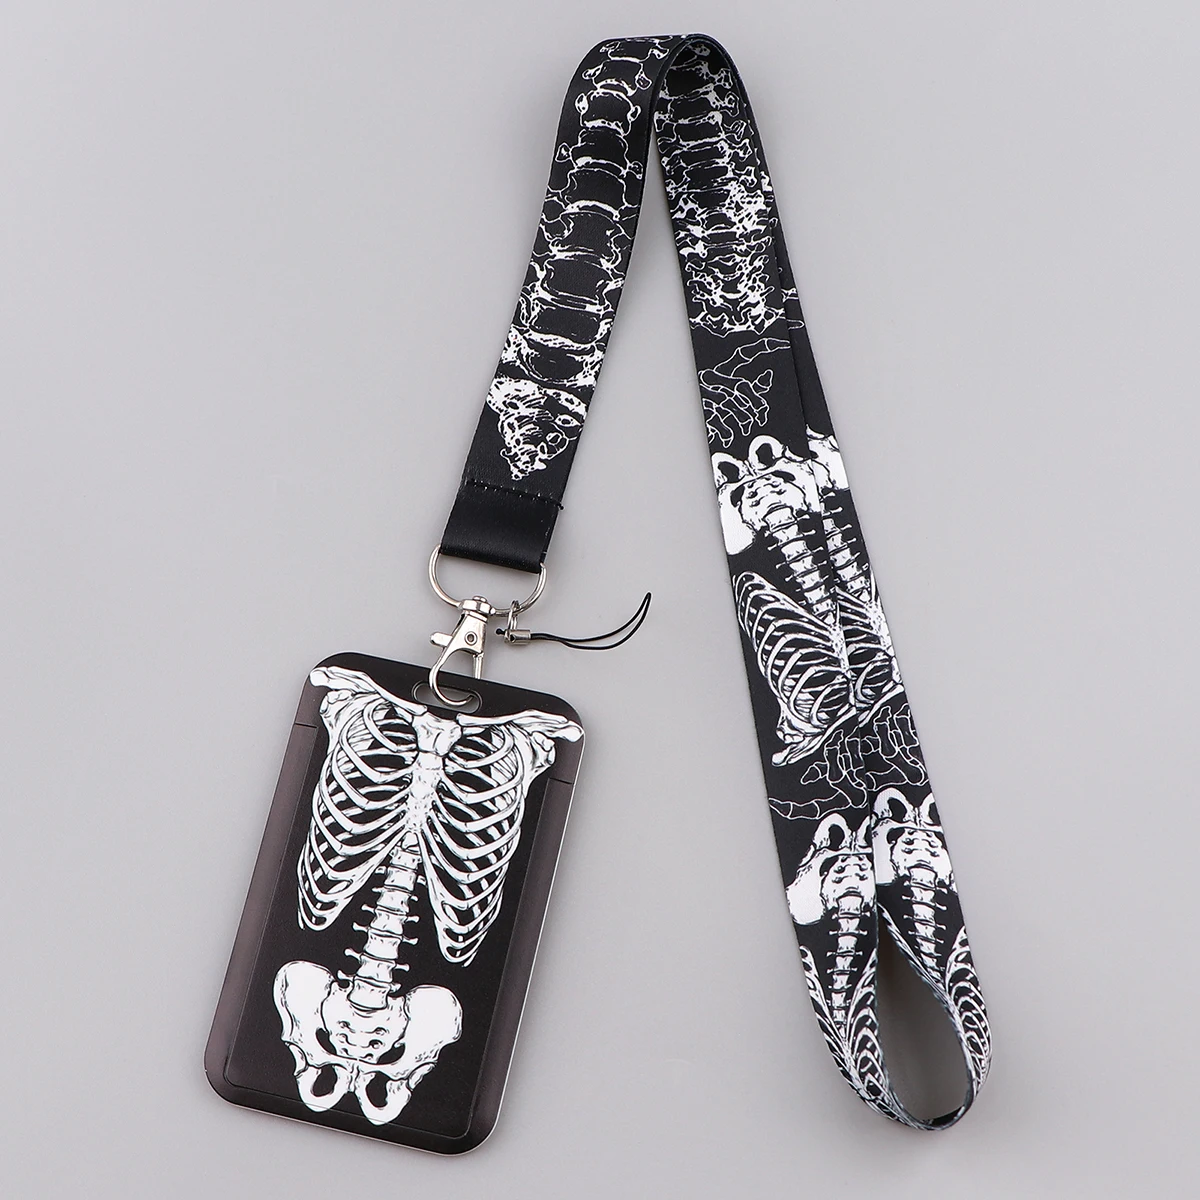 

Cool Skull Neck Strap Lanyard for Key ID Card Black and White Charm Strap Badge Holder DIY Hang Rope Keyring Accessories Gifts